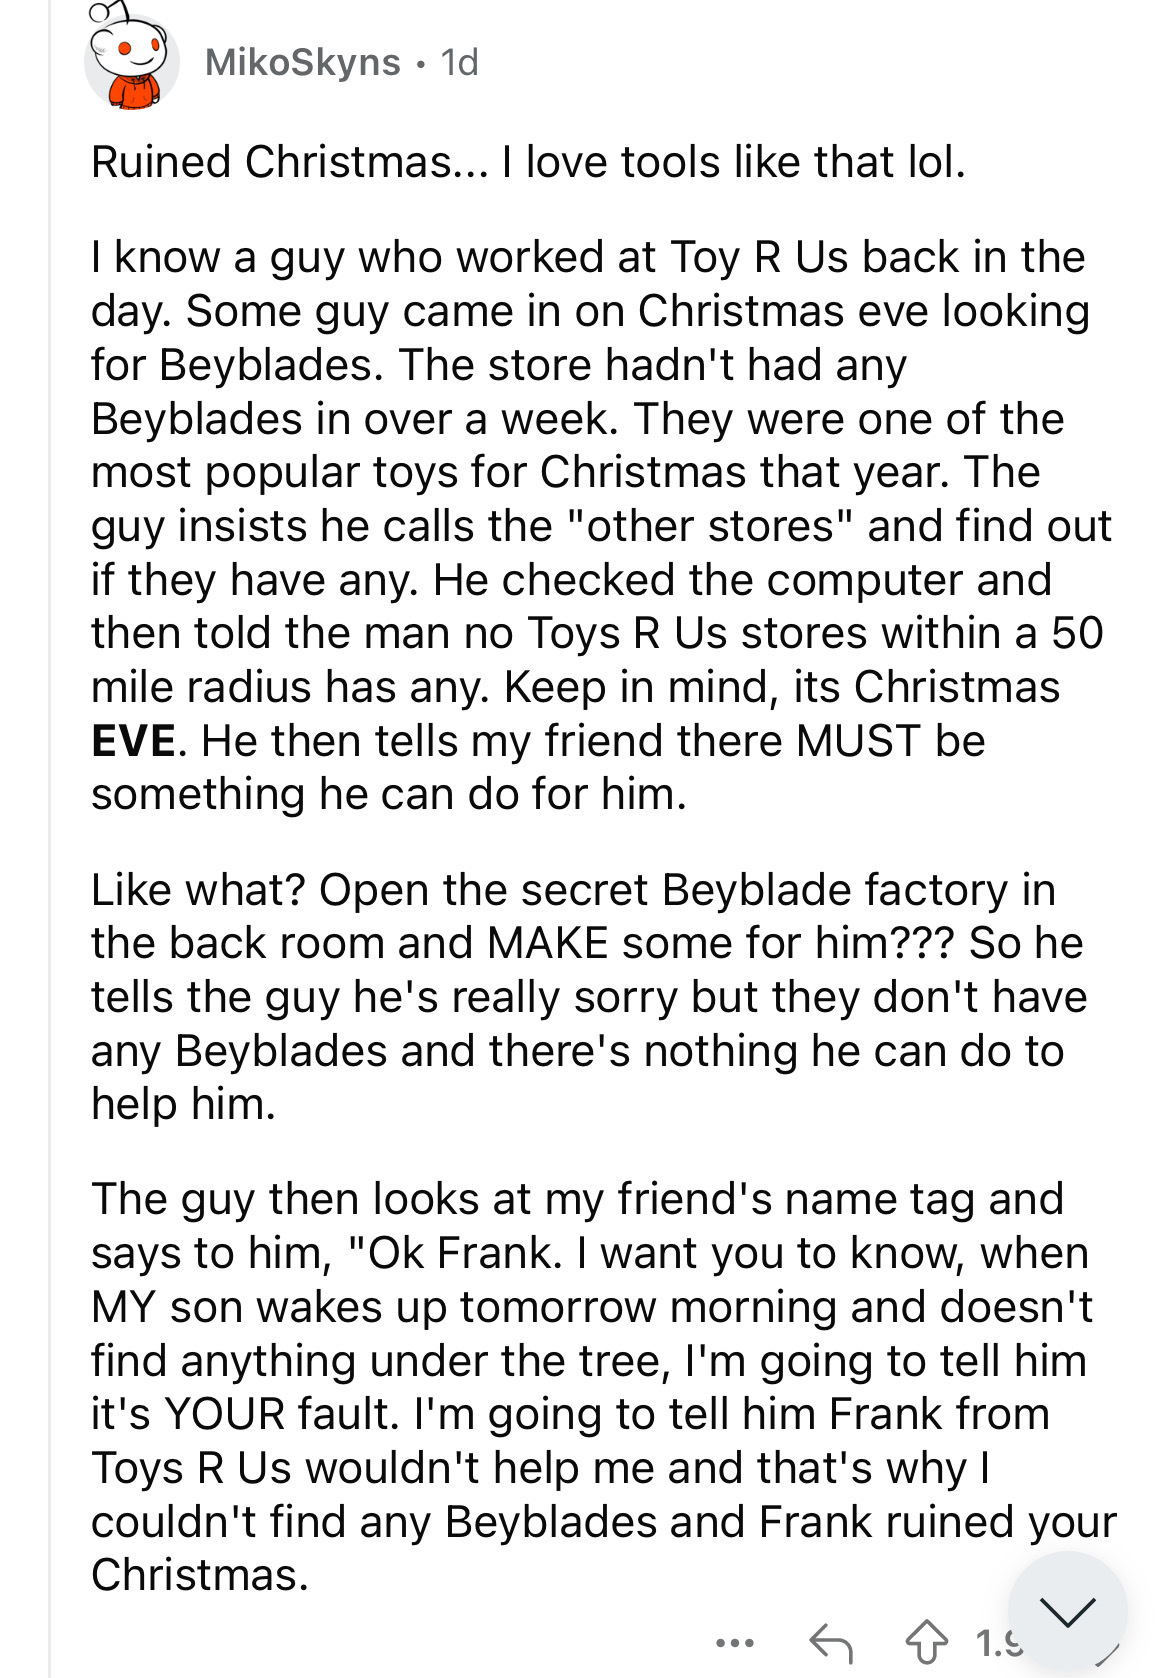 document - MikoSkyns . 1d Ruined Christmas... I love tools that lol. I know a guy who worked at Toy R Us back in the day. Some guy came in on Christmas eve looking for Beyblades. The store hadn't had any Beyblades in over a week. They were one of the most